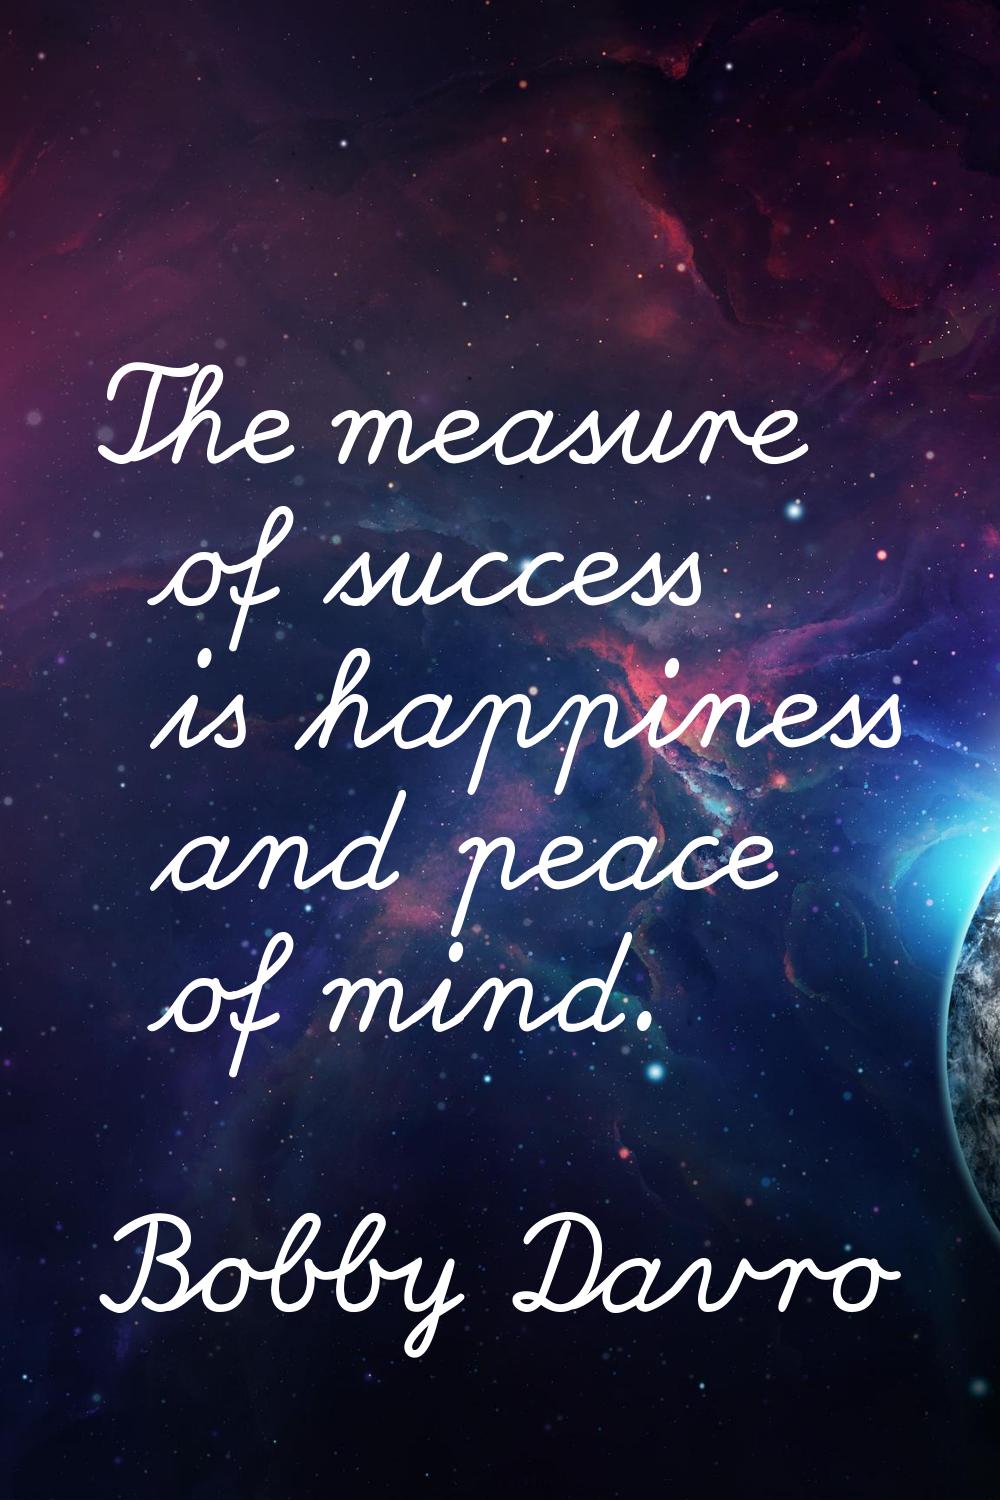 The measure of success is happiness and peace of mind.